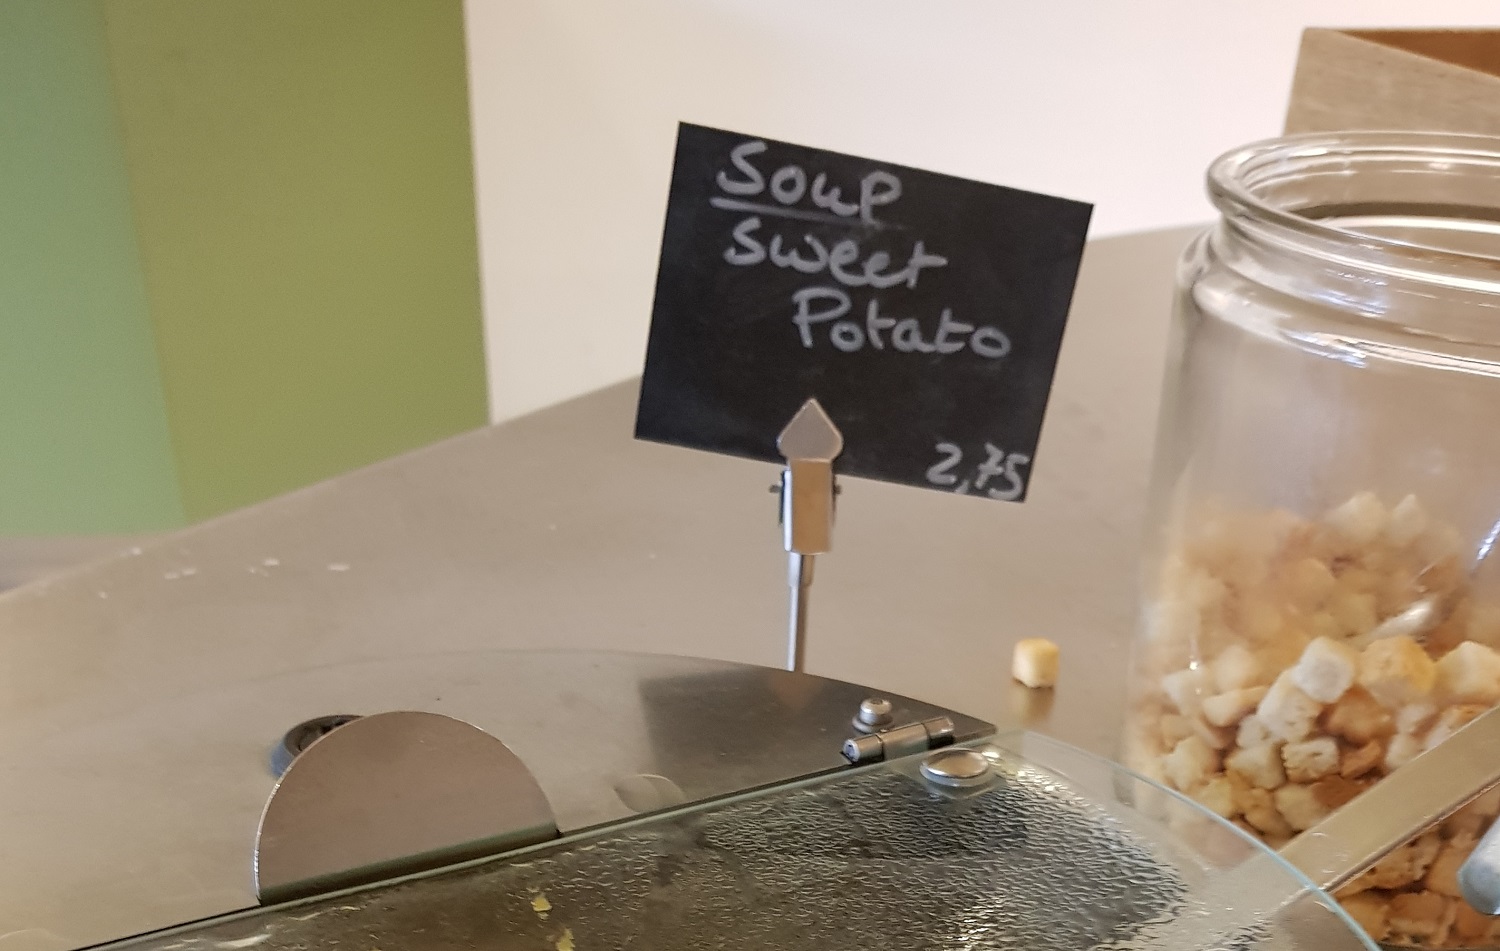 The country’s most expensive soup